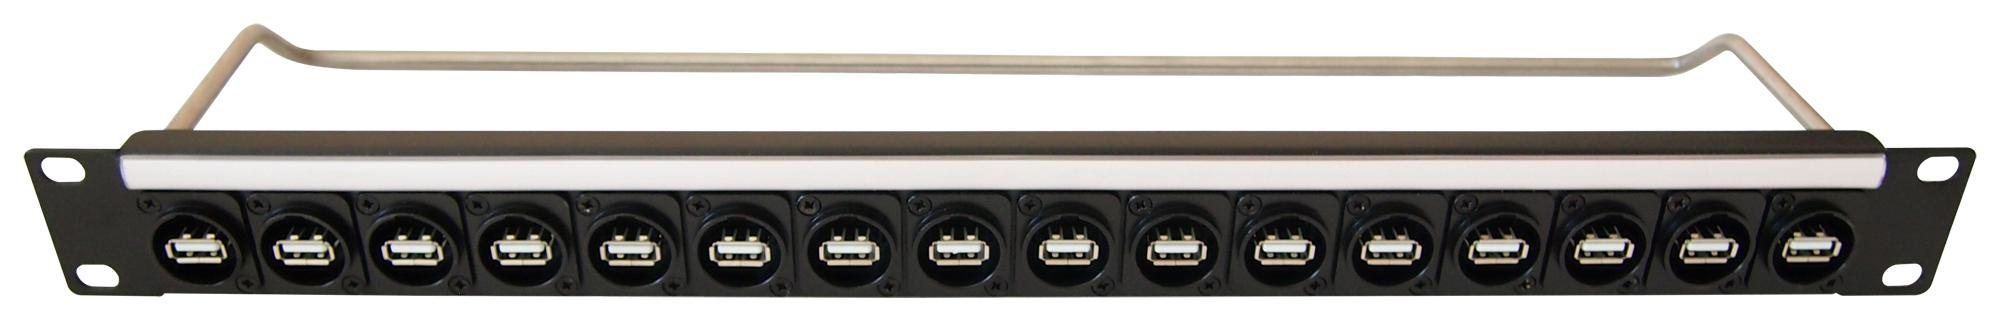 CP30175 PATCH PANEL, USB, 16PORT, 1U, M3 HOLE CLIFF ELECTRONIC COMPONENTS